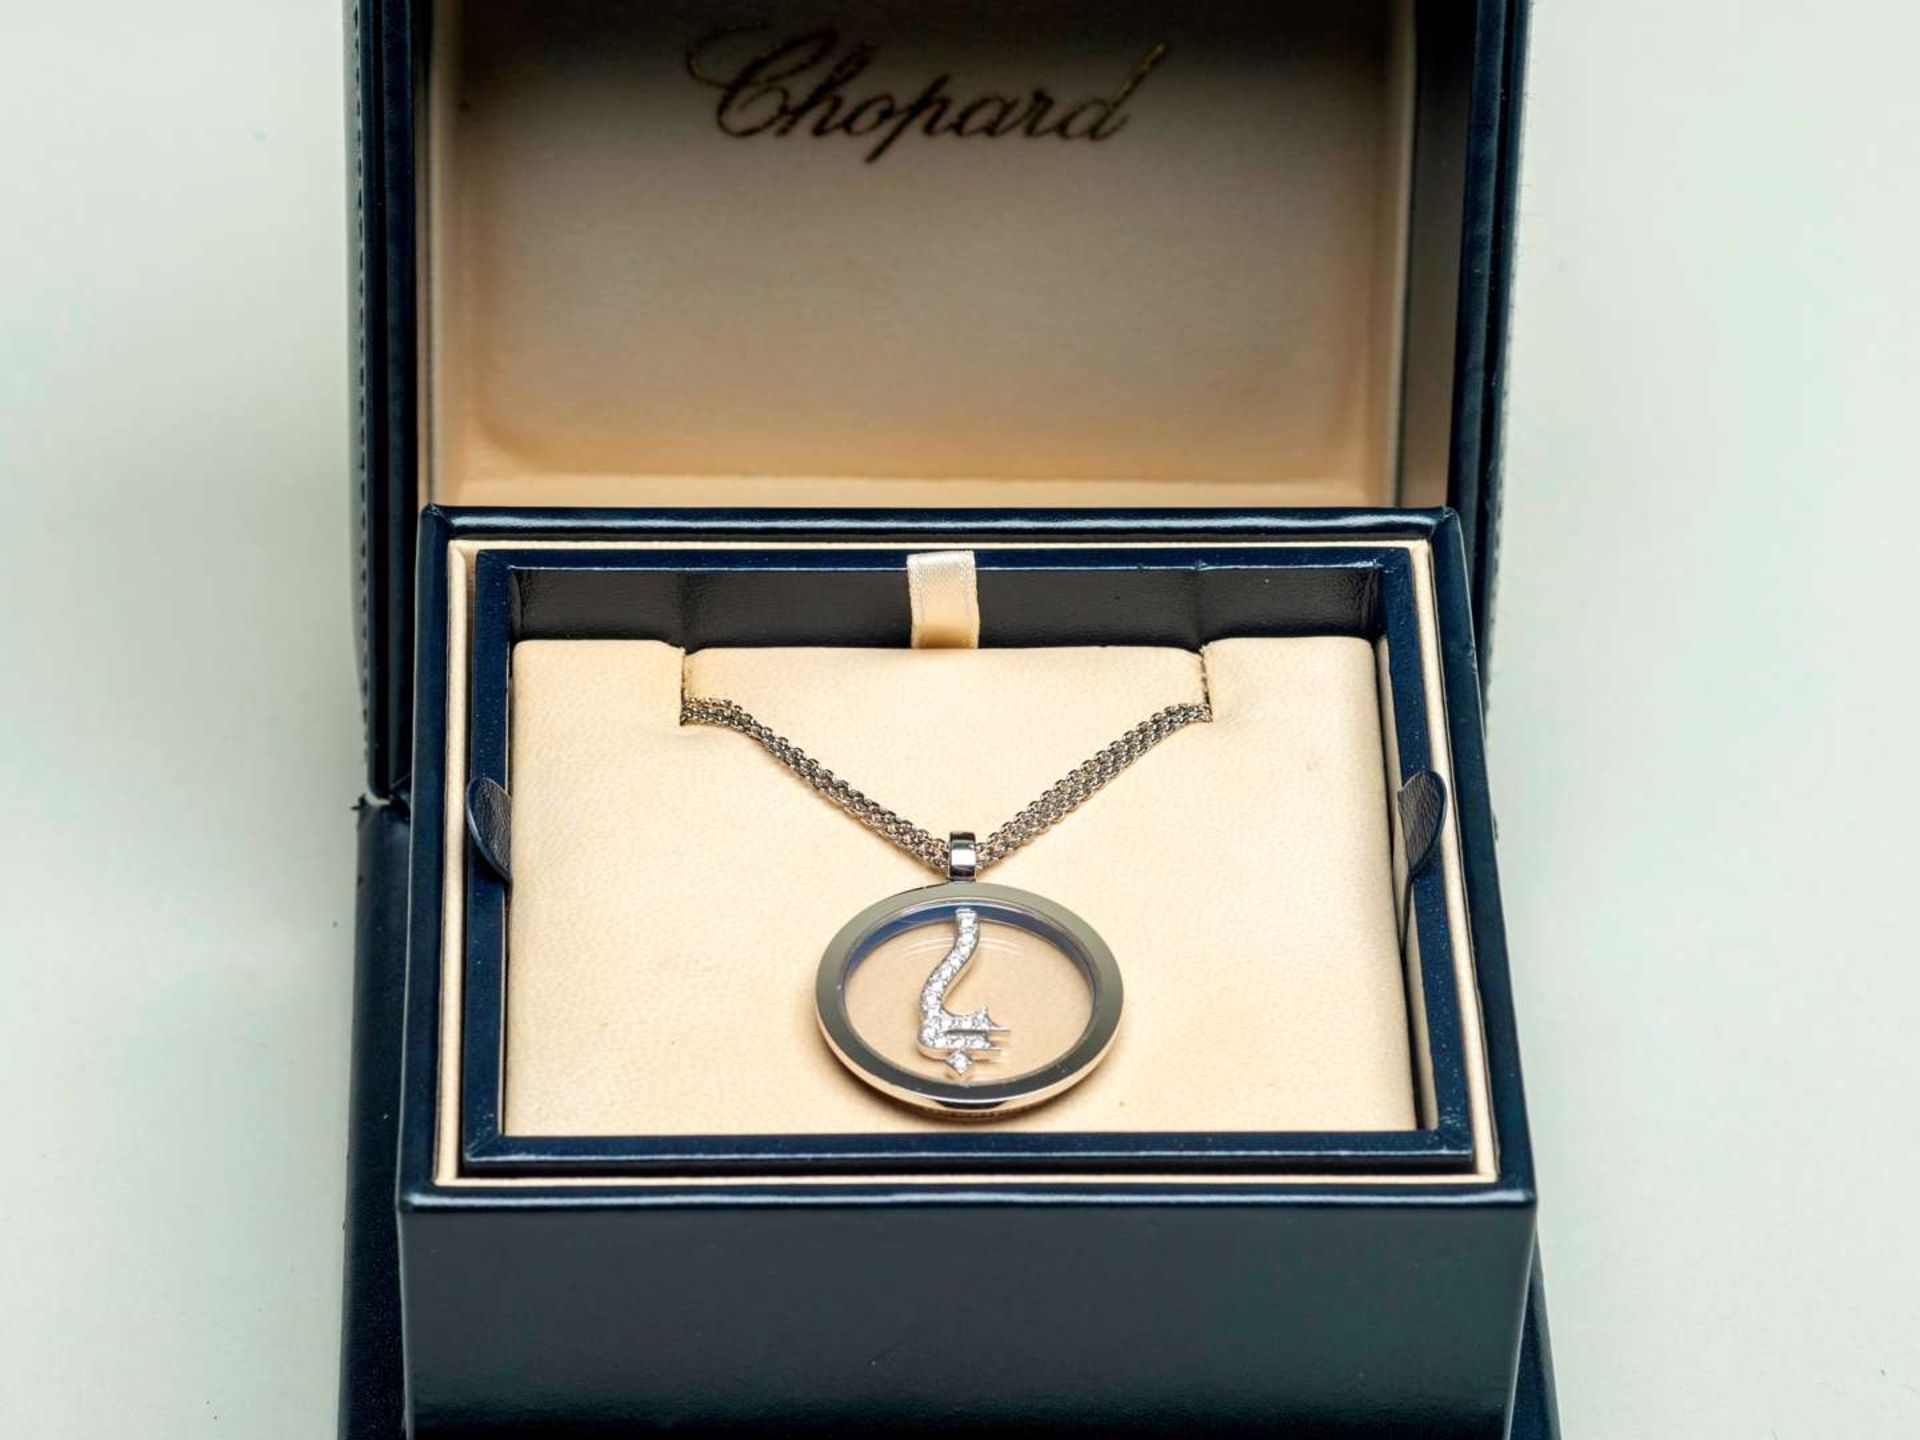 CHOPARD for GODOLPHIN, a modern 18ct white gold and diamond set pendant and chain - Image 2 of 3